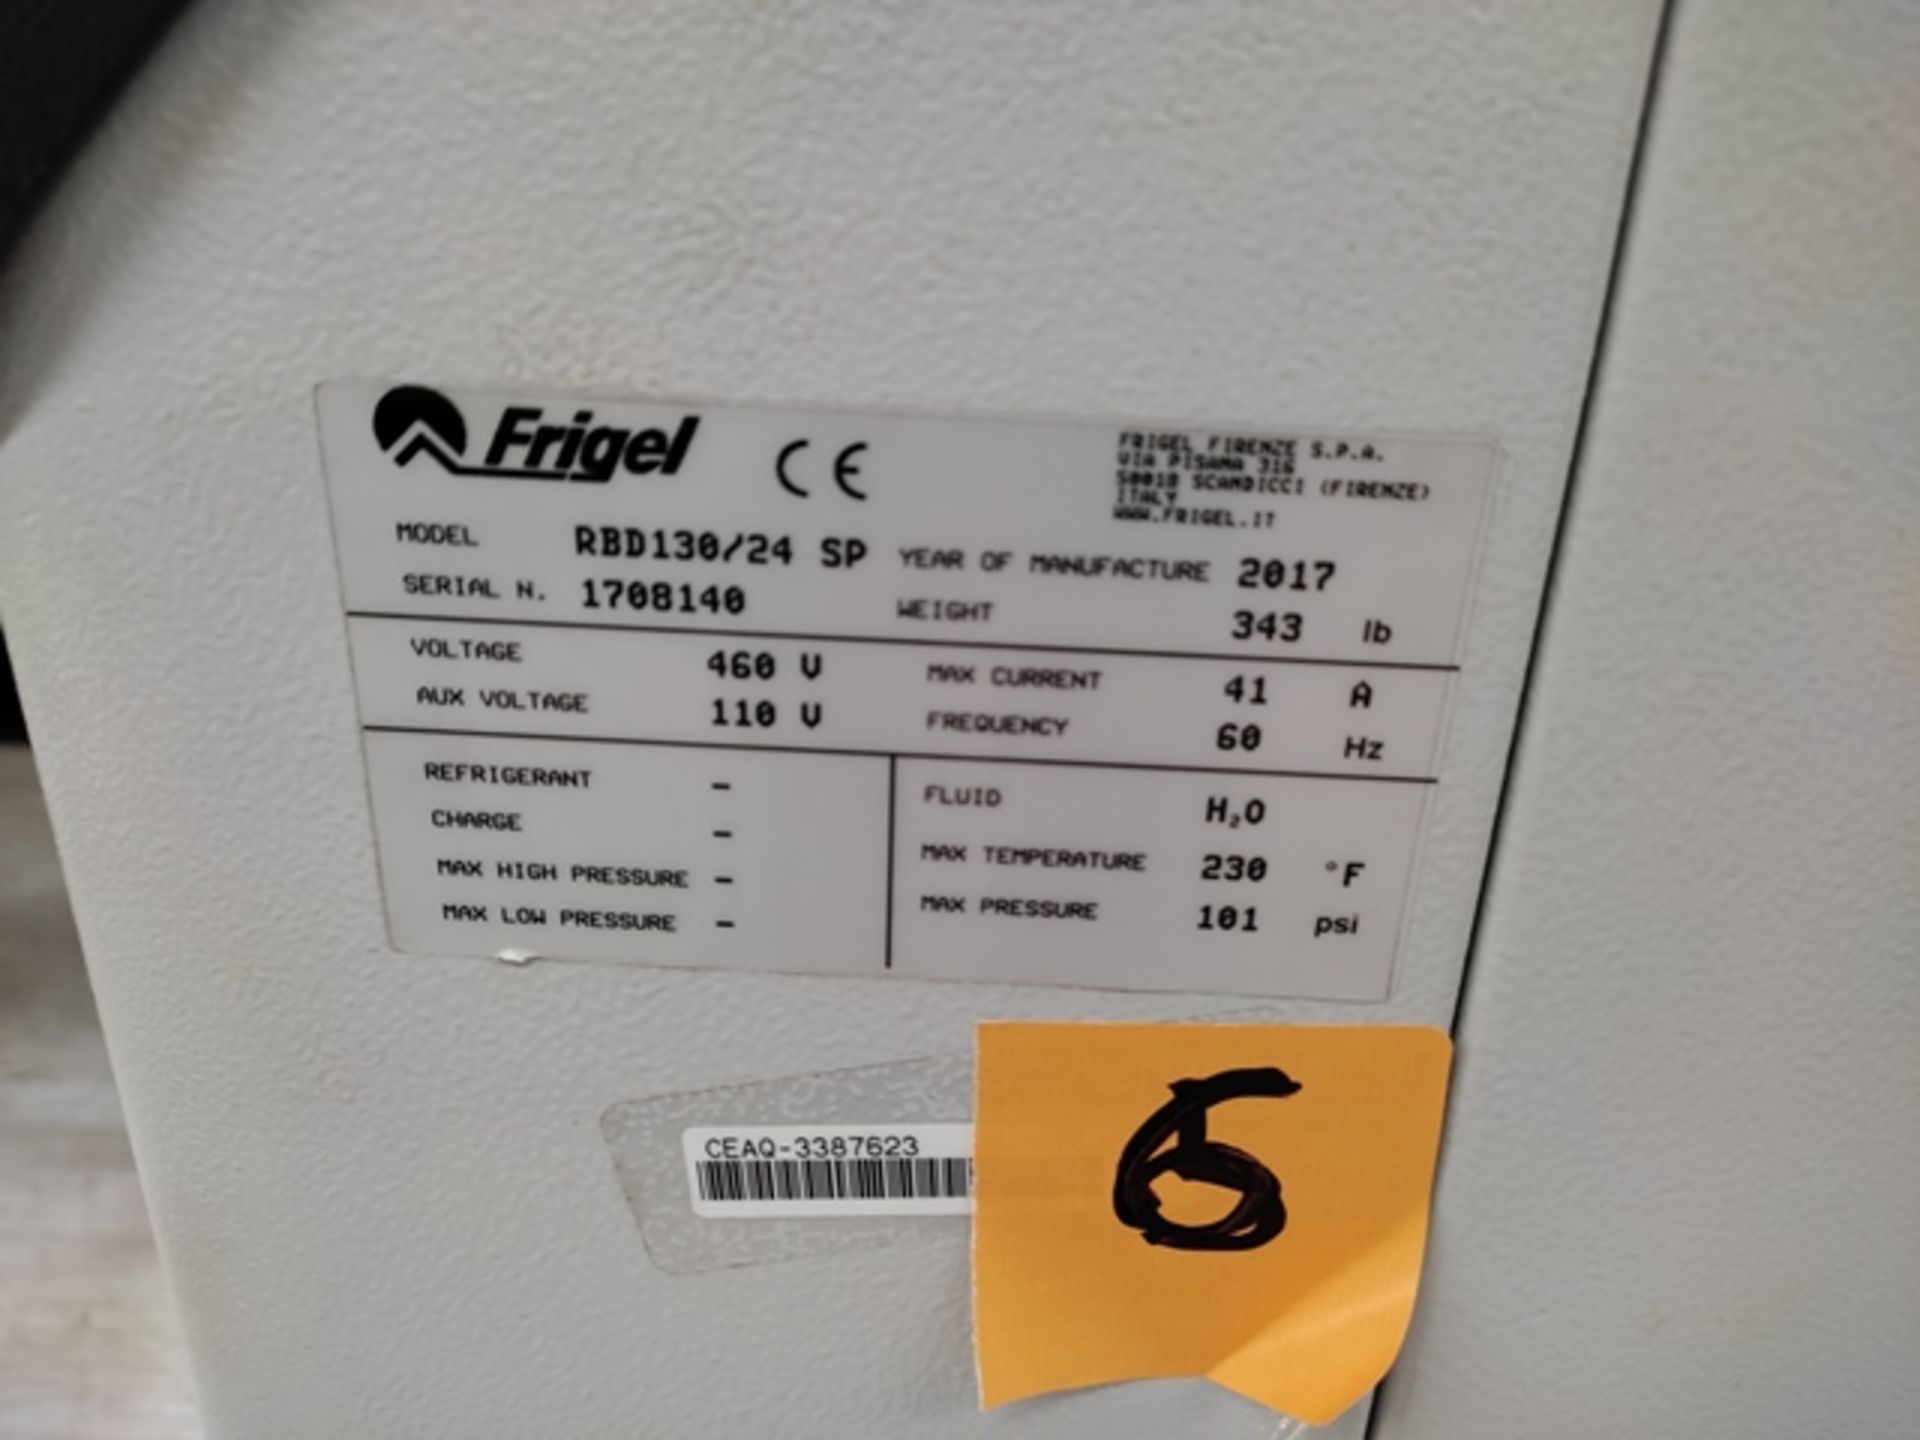 Lot of: (3) Frigel RBD130/24 SP 24 KW Flow Booster Temperature Controller, Year: 2017; - Image 14 of 16